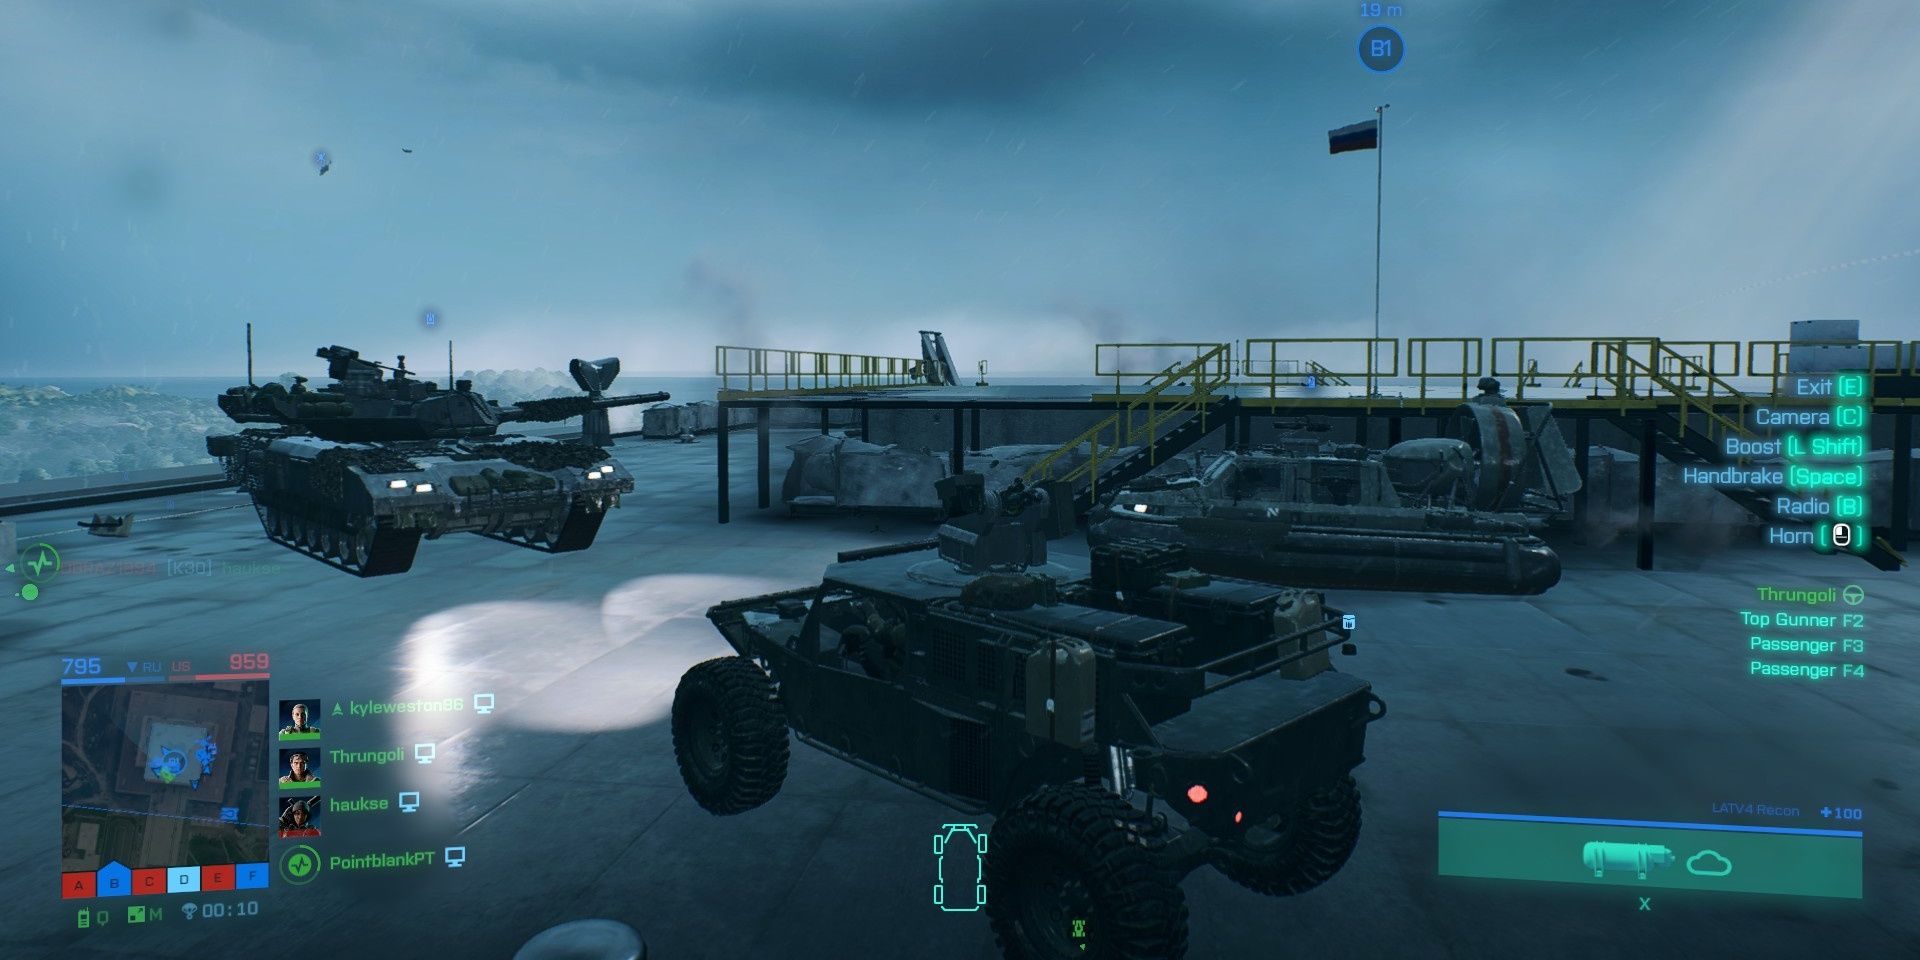 A tank, an LATV4 Recon, and an LCAA Hovercraft camping a rooftop objective in Battlefield 2042